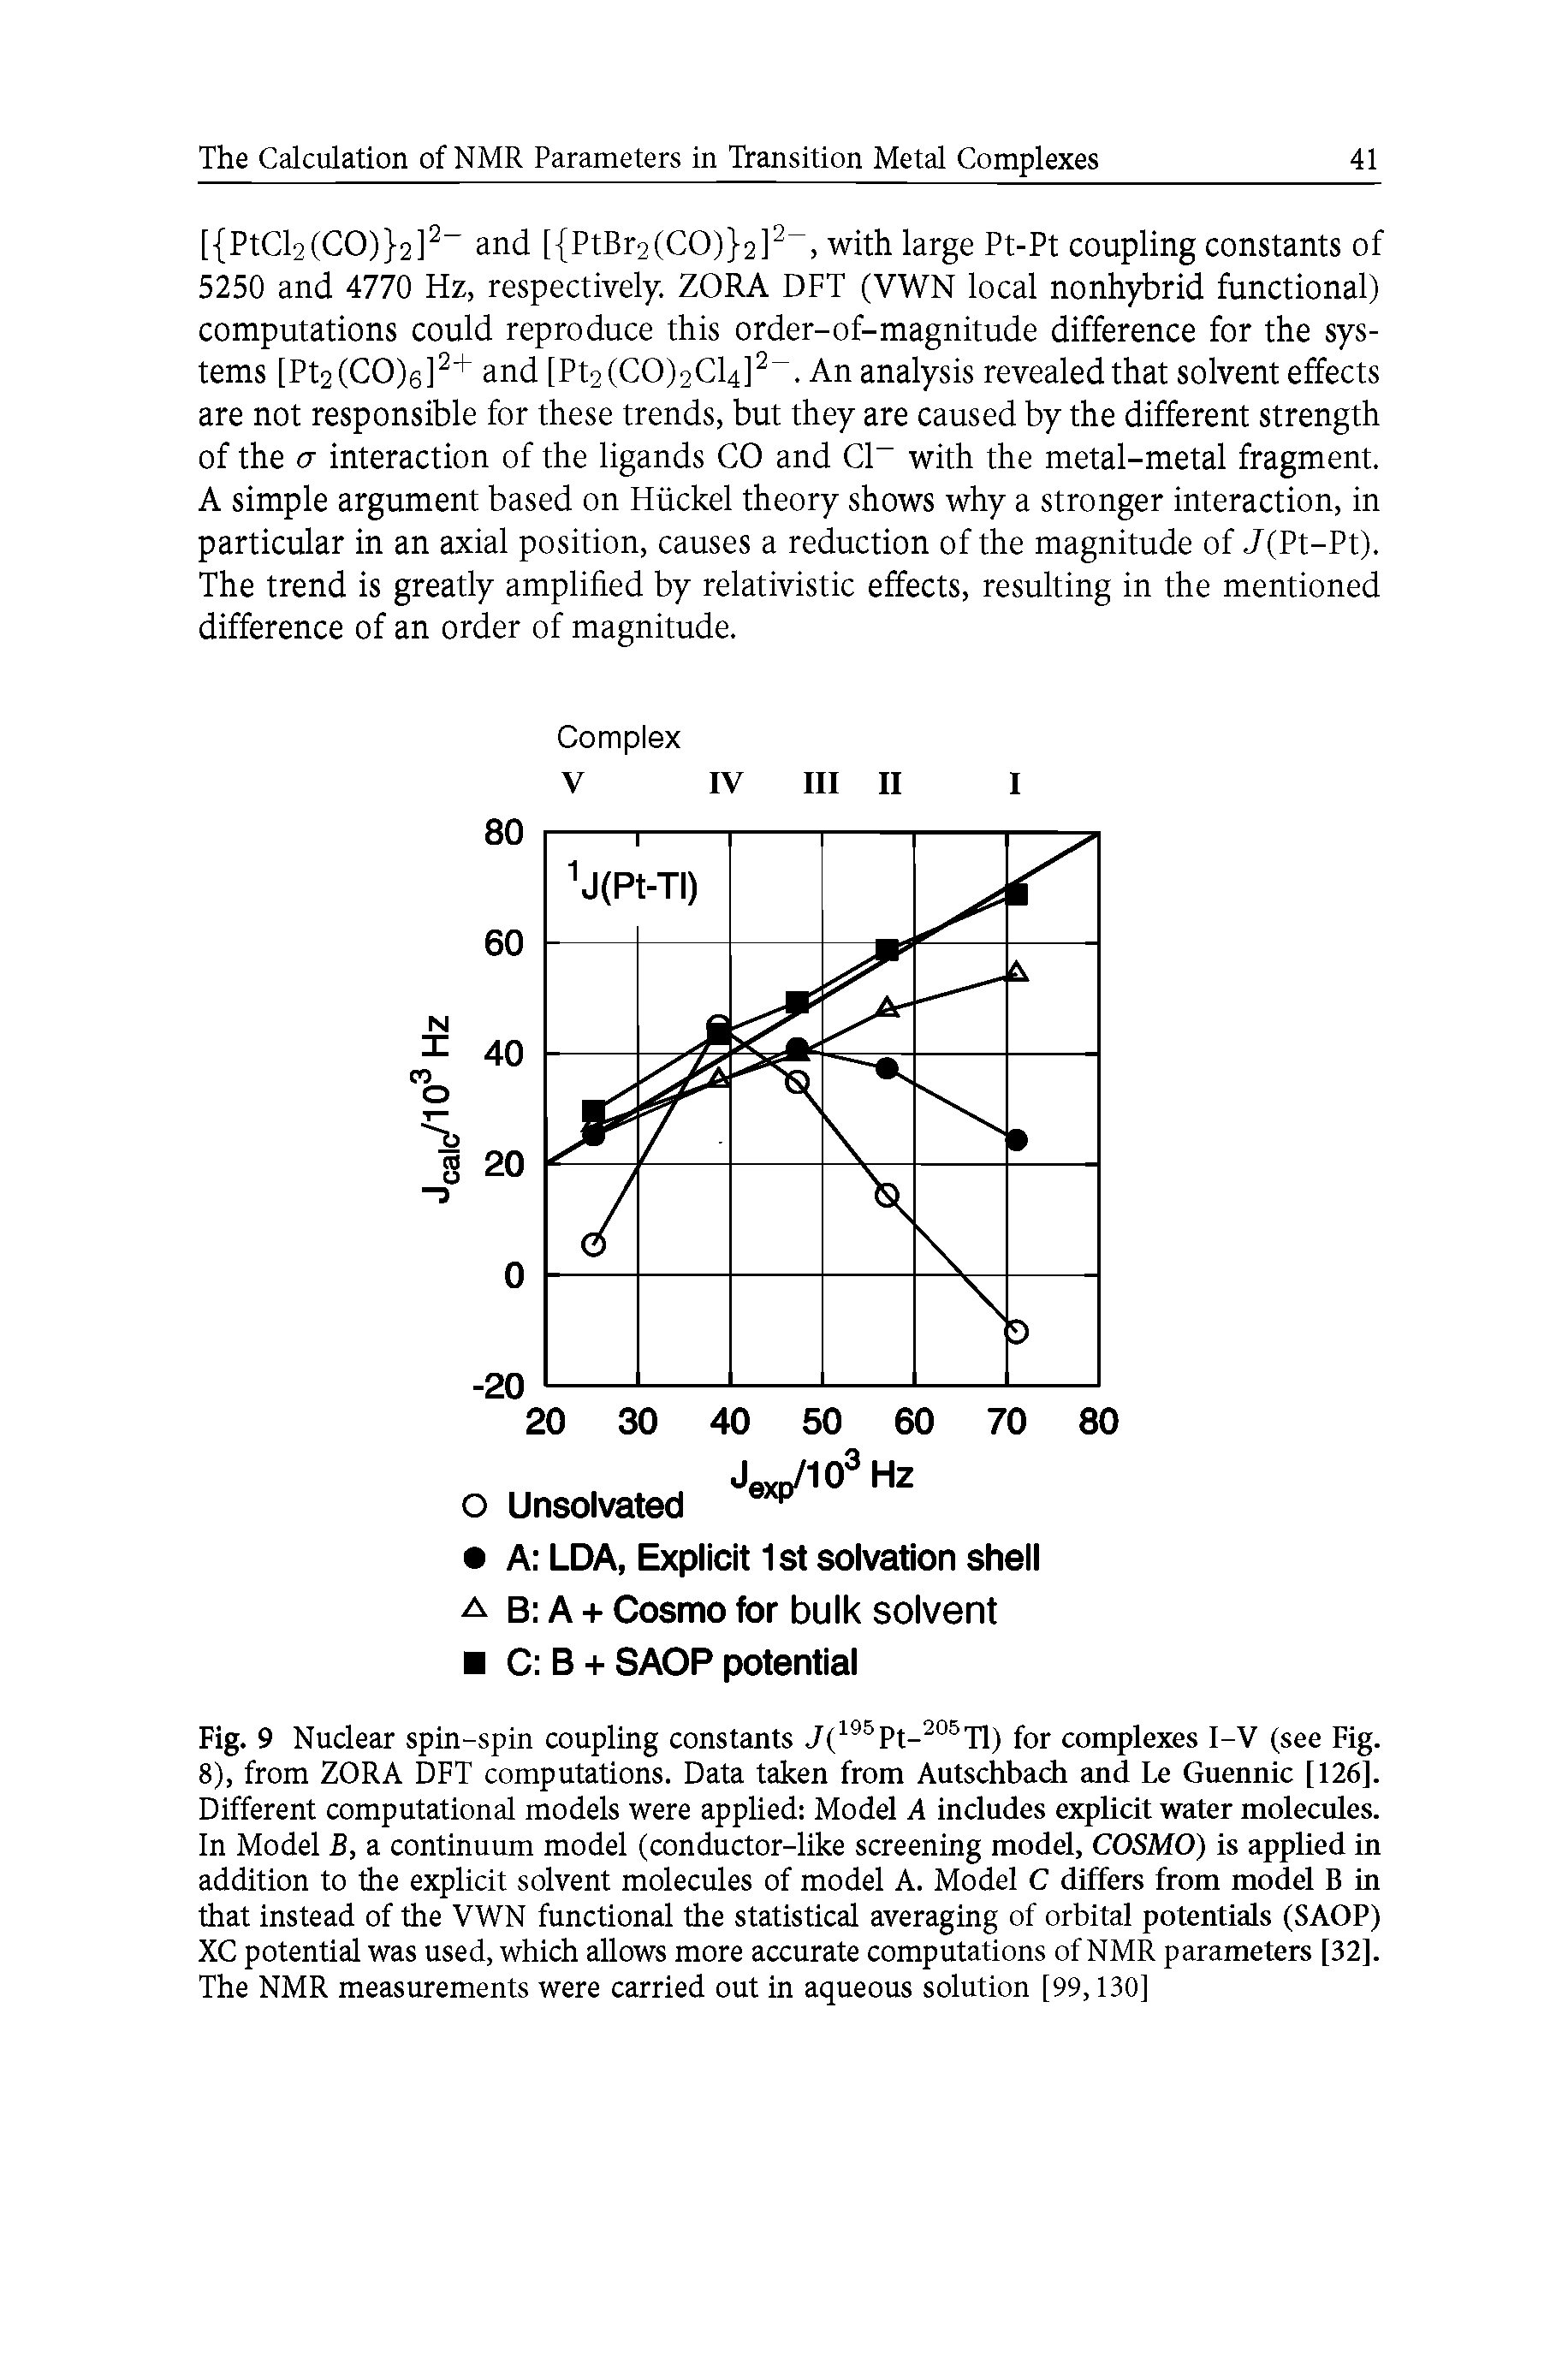 Fig. 9 Nuclear spin-spin coupling constants J(195Pt-205Tl) for complexes I-V (see Fig. 8), from ZORA DFT computations. Data taken from Autschbach and Le Guennic [126]. Different computational models were applied Model A includes explicit water molecules. In Model B, a continuum model (conductor-like screening model, COSMO) is applied in addition to the explicit solvent molecules of model A. Model C differs from model B in that instead of the VWN functional the statistical averaging of orbital potentials (SAOP) XC potential was used, which allows more accurate computations of NMR parameters [32]. The NMR measurements were carried out in aqueous solution [99,130]...